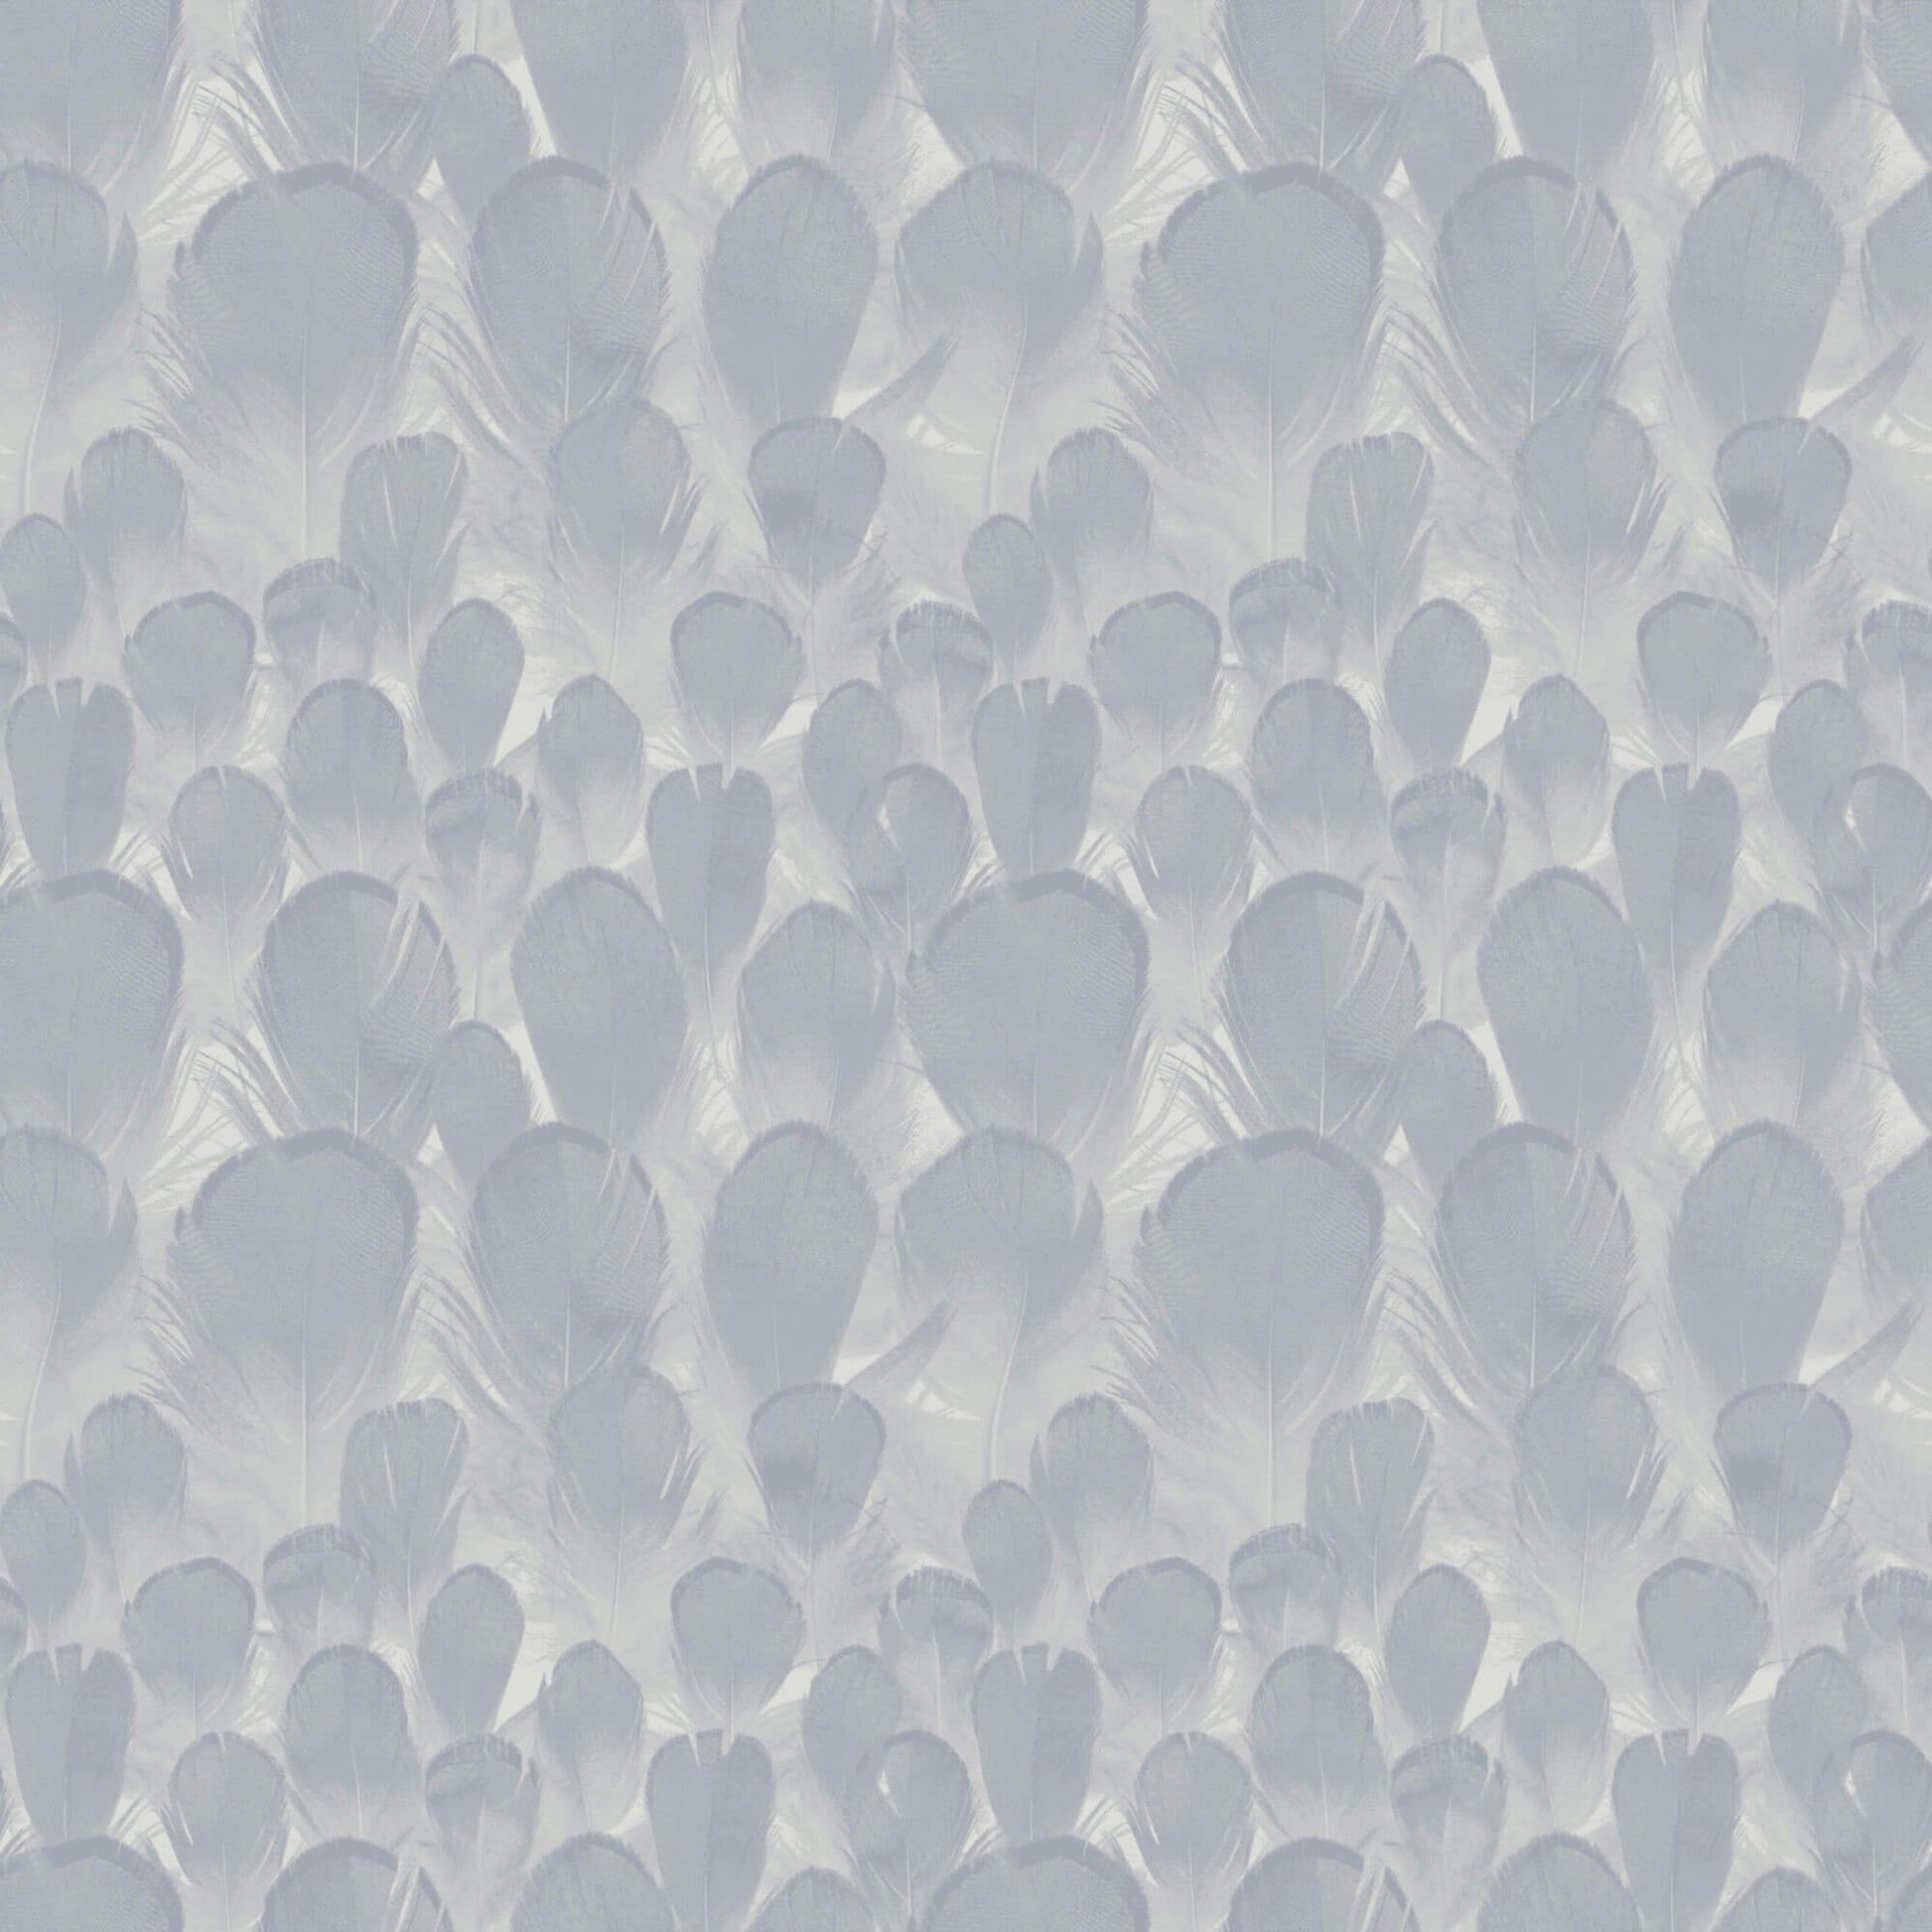 A close up of a wallpaper featuring a pattern of pale blue feathers - Feathers